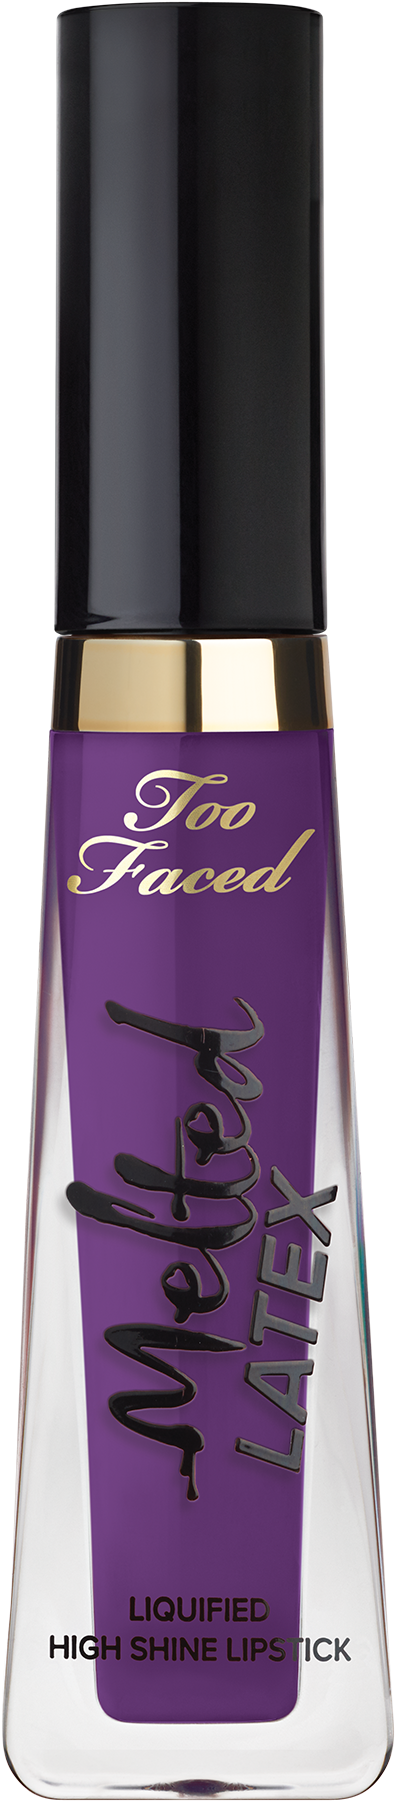 Melted Latex - Bye Felicia - Too Faced Melted Latex - Liquified High Shine Lipstick (2000x1800), Png Download